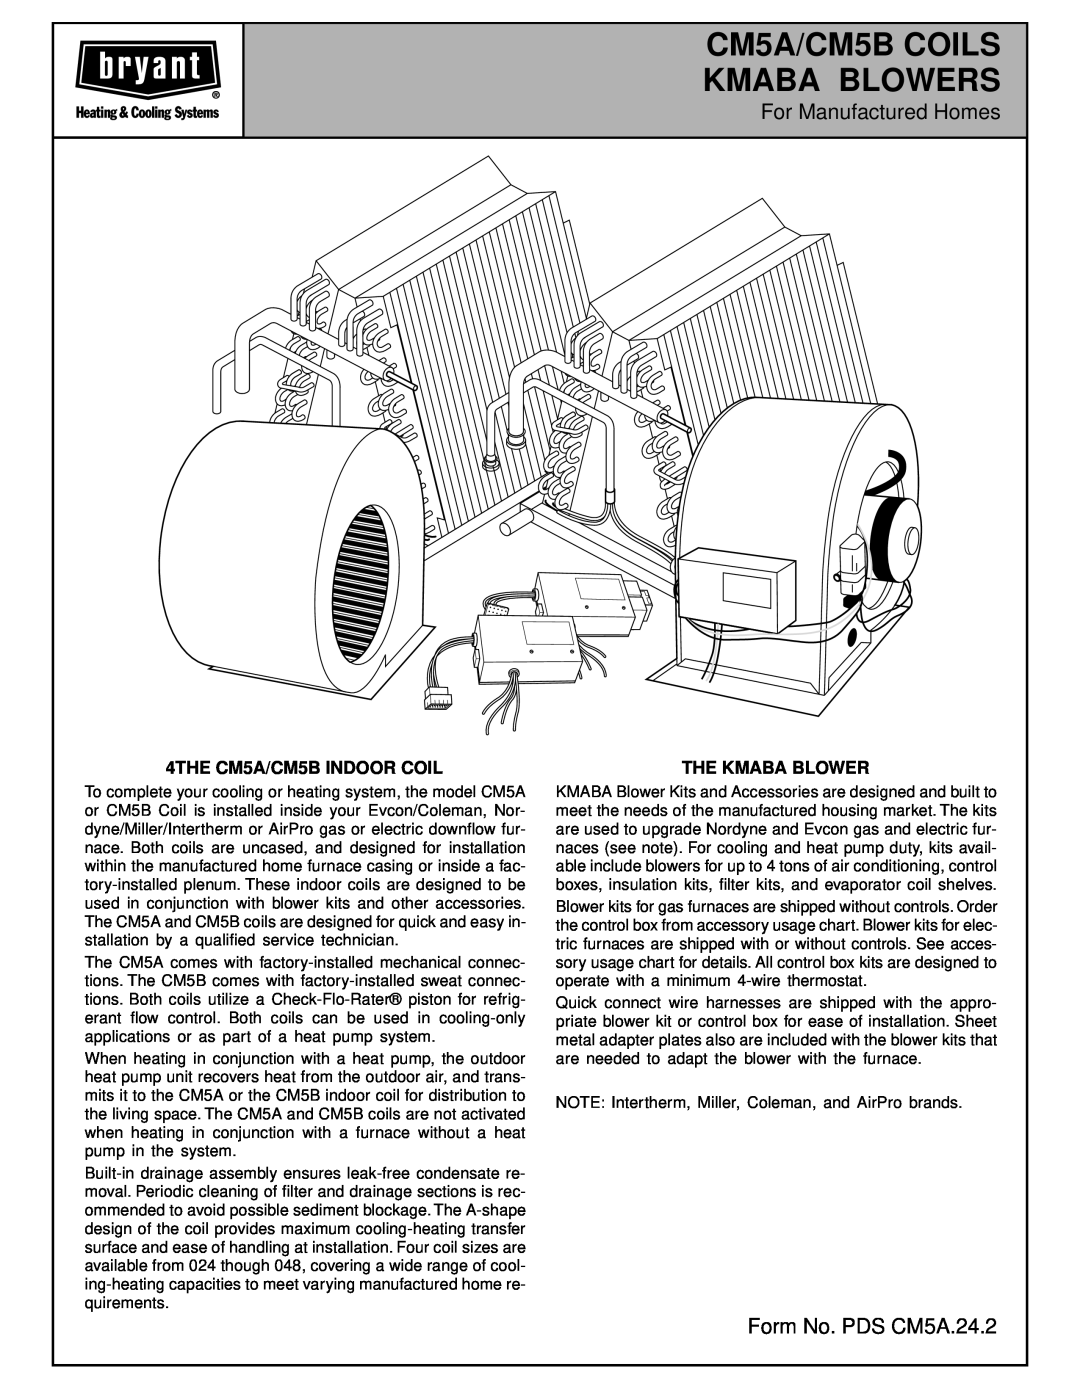 Bryant manual For Manufactured Homes, Form No. PDS CM5A.24.2, CM5A/CM5B COILS KMABA BLOWERS, 4THE CM5A/CM5B INDOOR COIL 